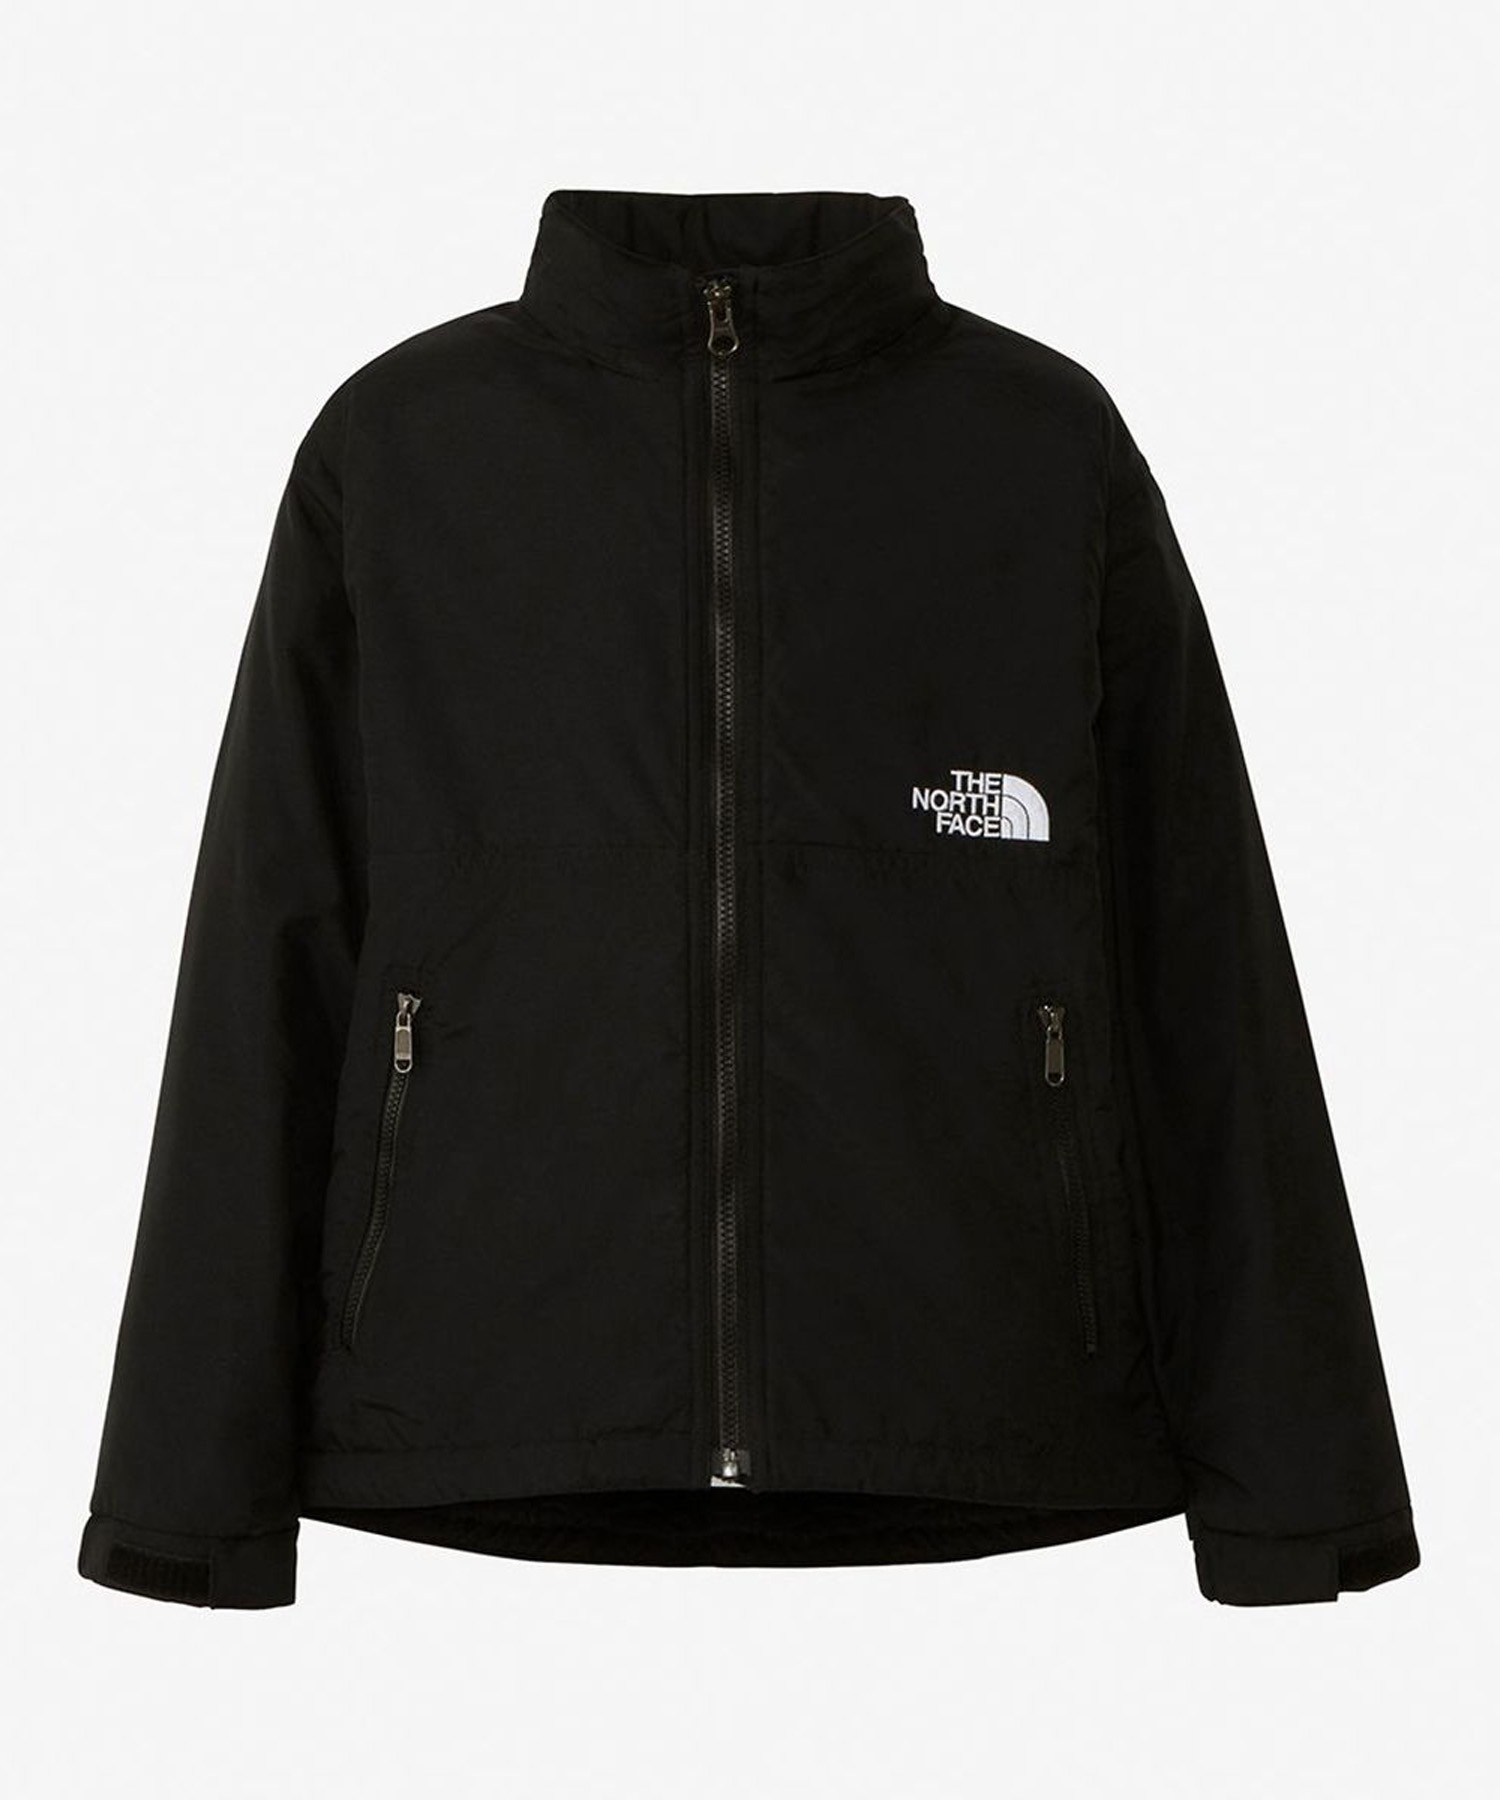 THE NORTH FACE/ザ・ノース・フェイス Compact Nomad Jacket